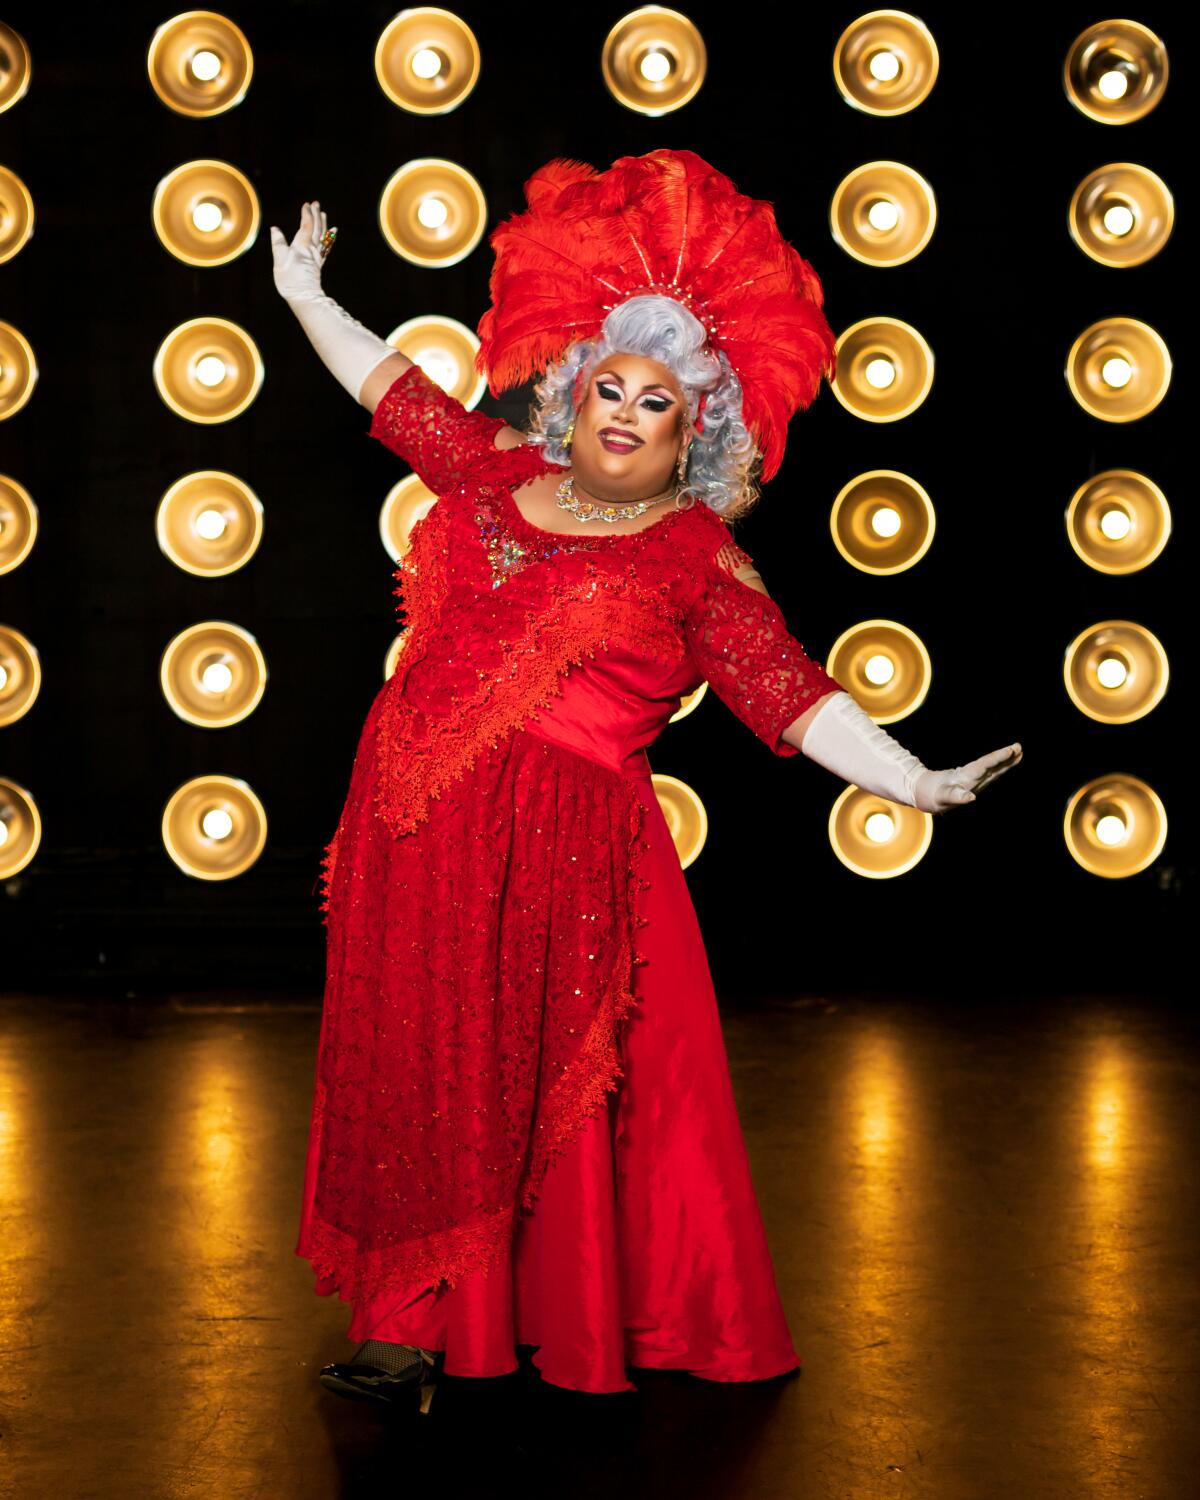 Segerstrom Center for the Arts presents its inaugural Drag Brunch.